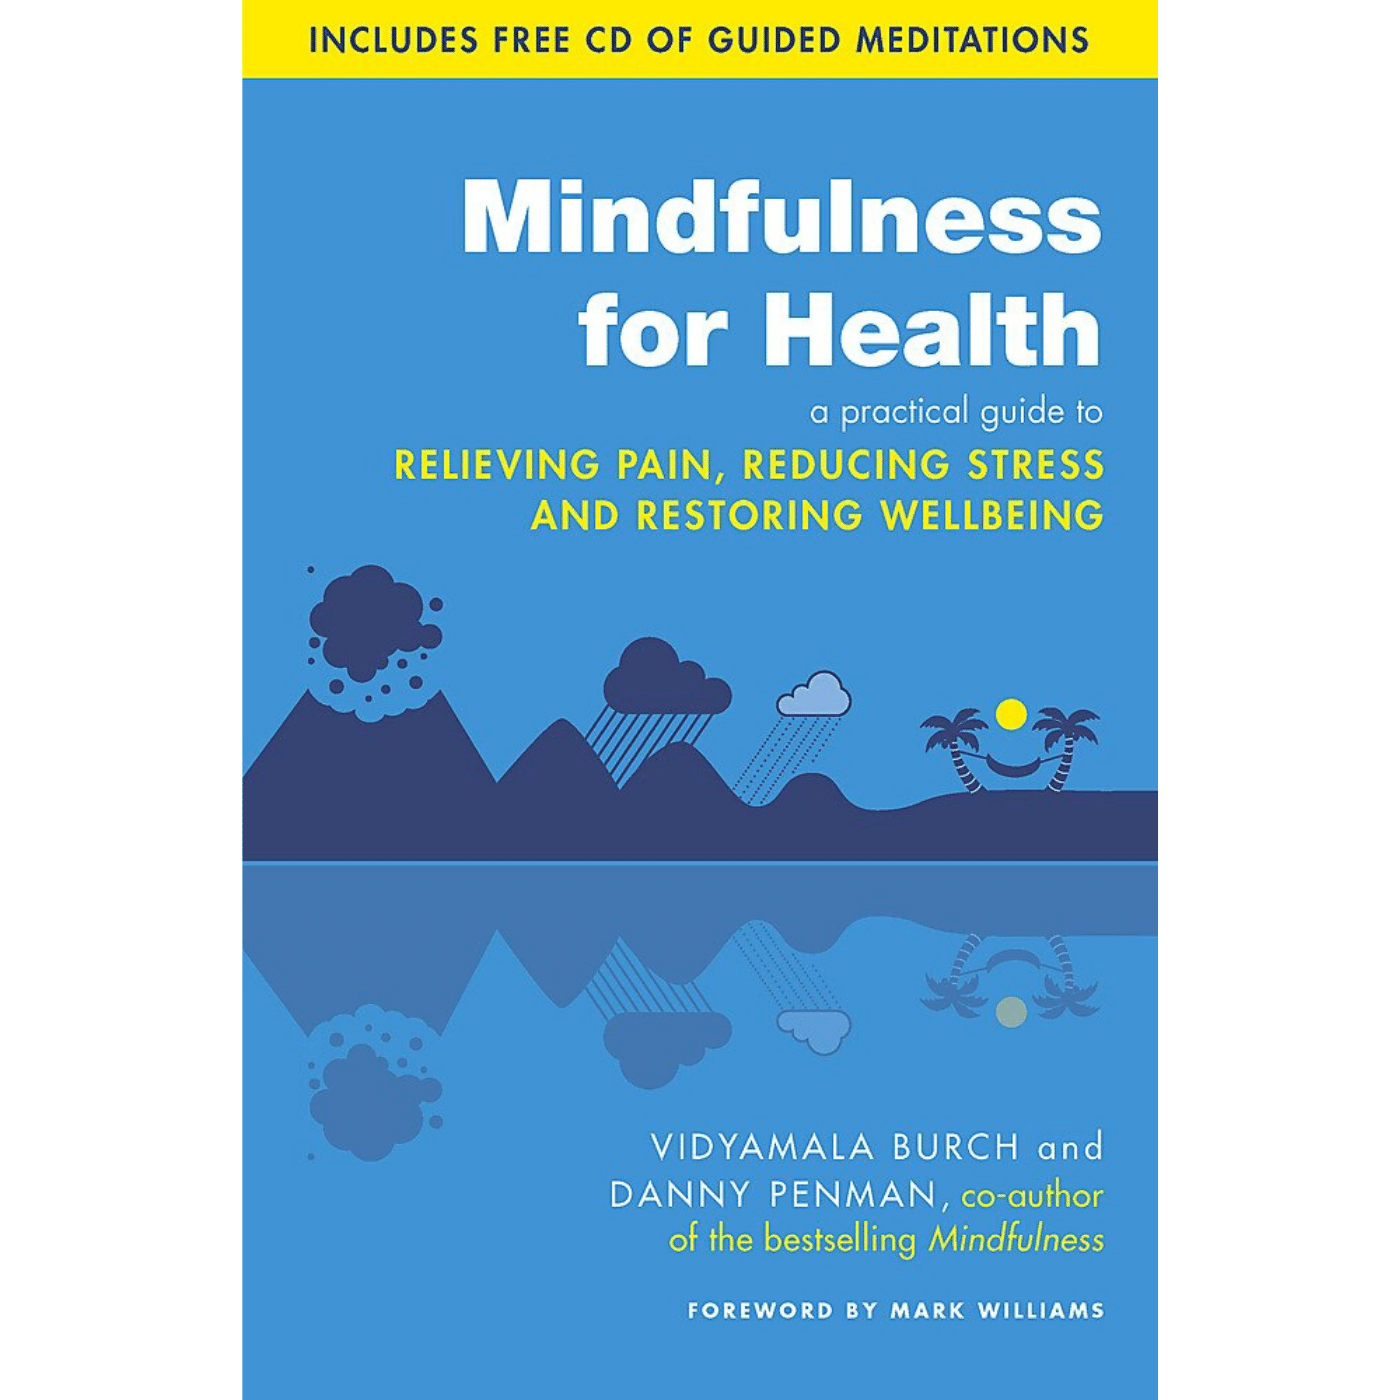 Mindfulness for Health Front|Mindfulness for Health Back|Mindfulness for Health Size